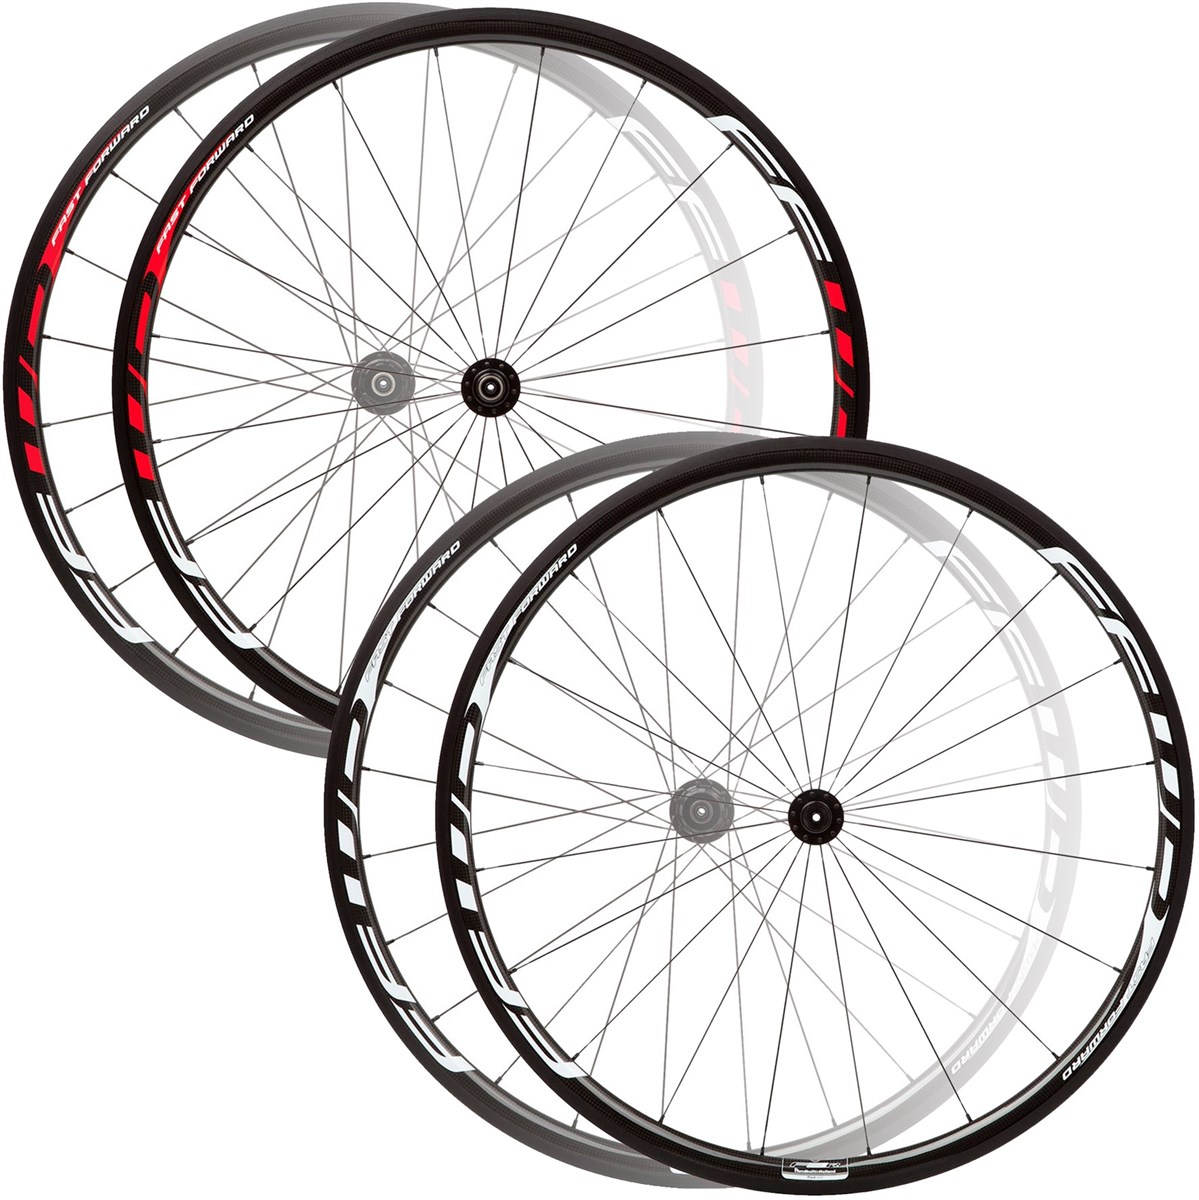 Fast Forward F3R Full Carbon Clincher 700c Road Wheelset (DT240) product image